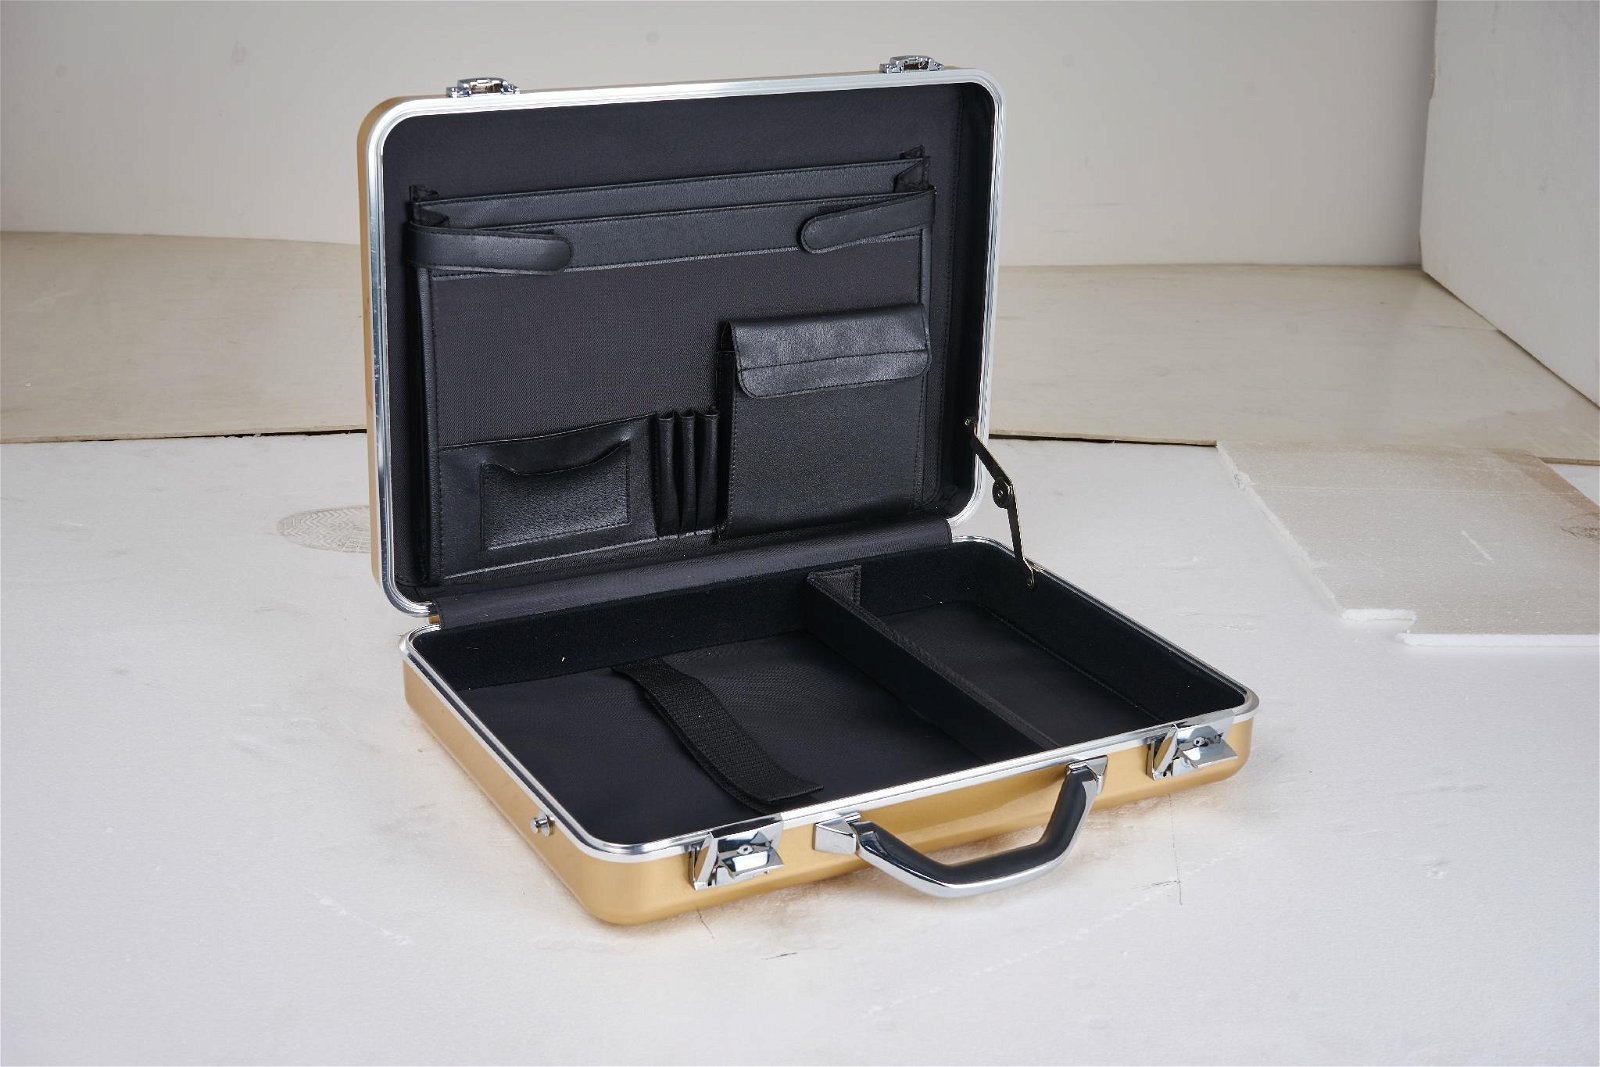 Anodize Aluminum Alloy Attache Cases For Carry Documents or Laptop Computer 4